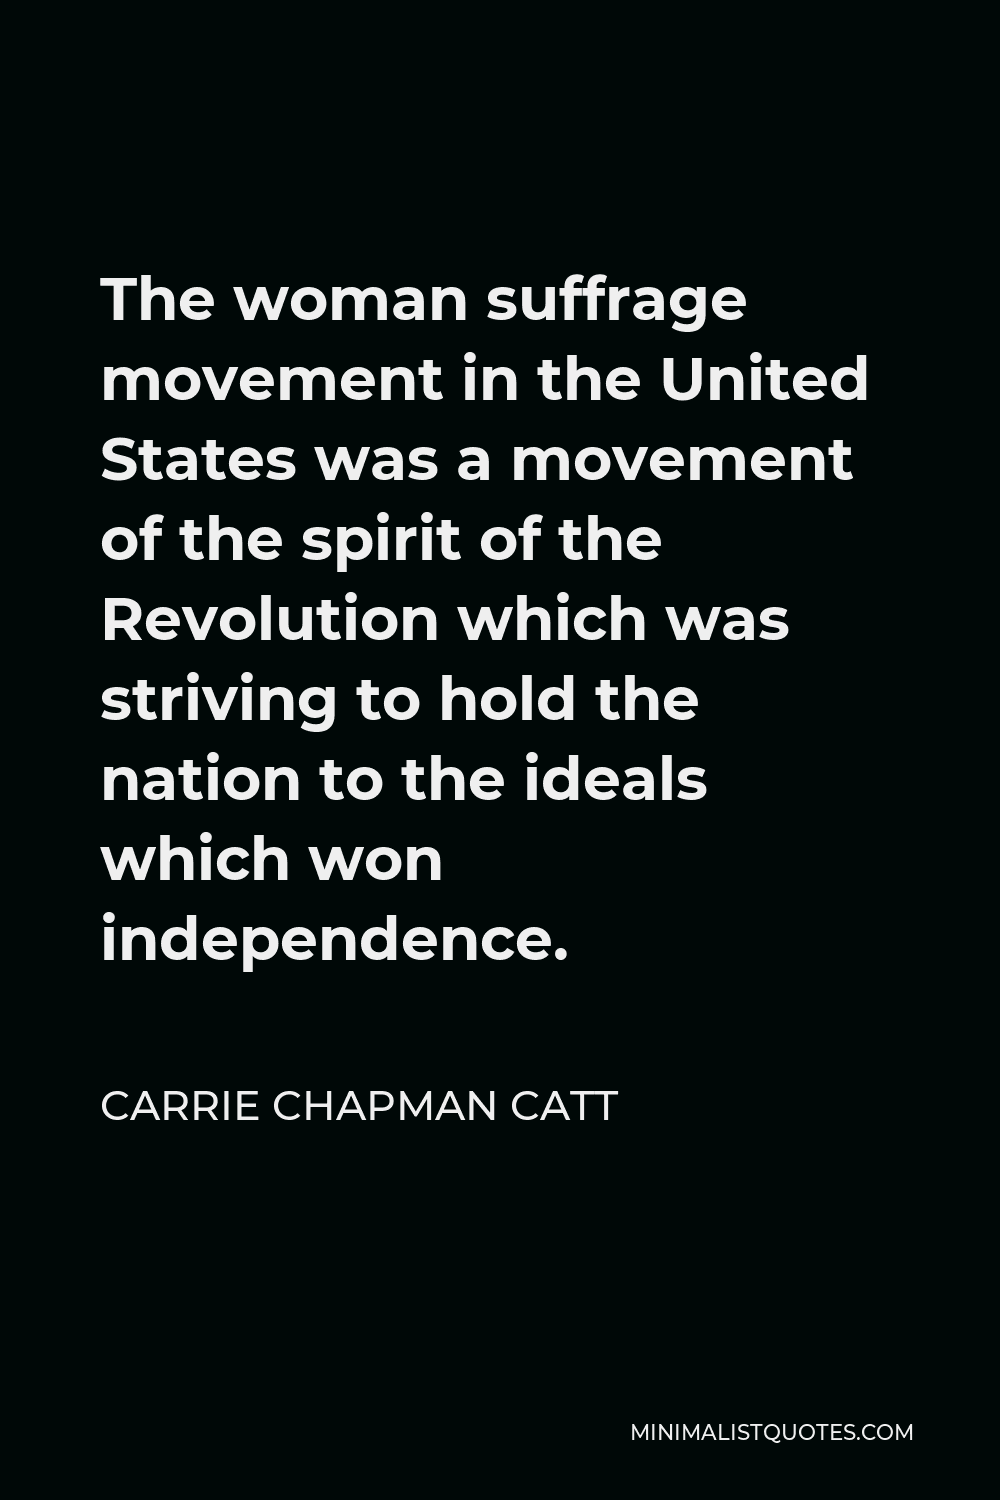 Carrie Chapman Catt Quote - The woman suffrage movement in the United States was a movement of the spirit of the Revolution which was striving to hold the nation to the ideals which won independence.